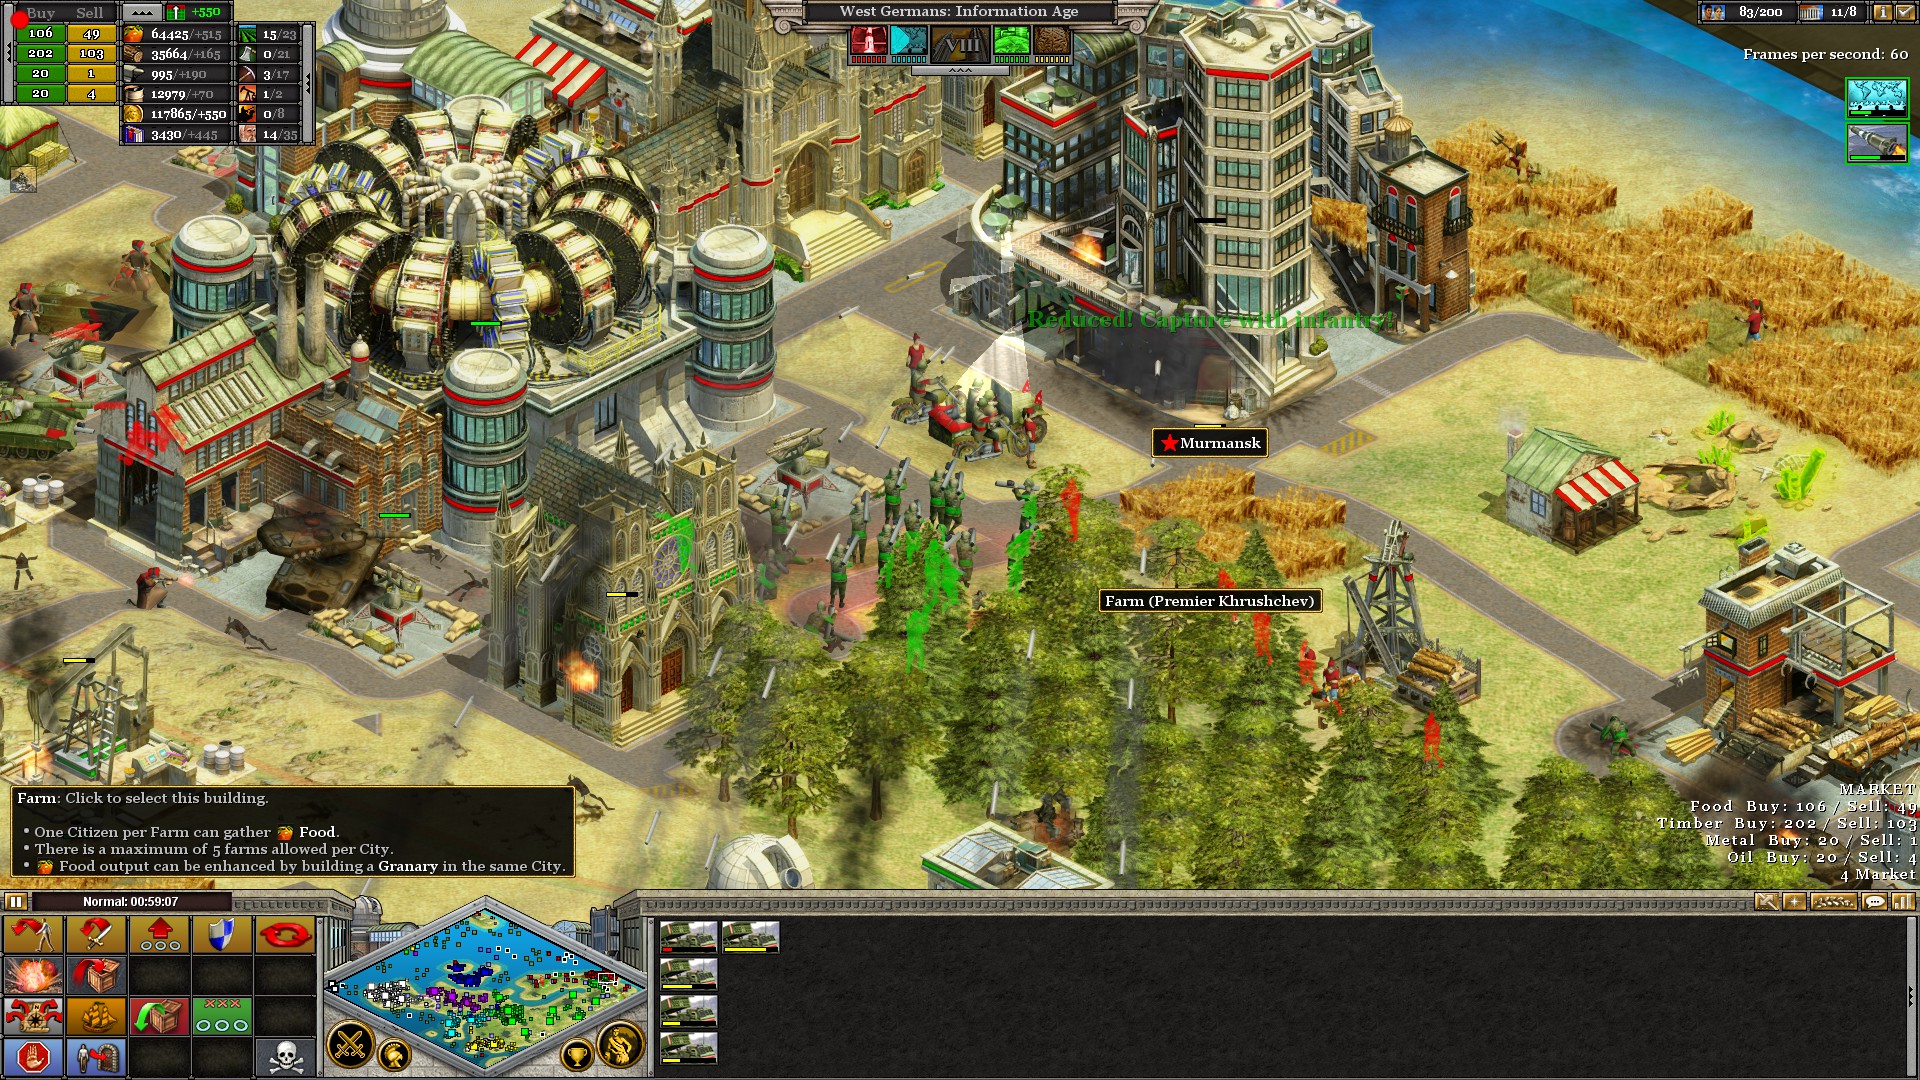 Rise of Nations extended edition in windows 10 